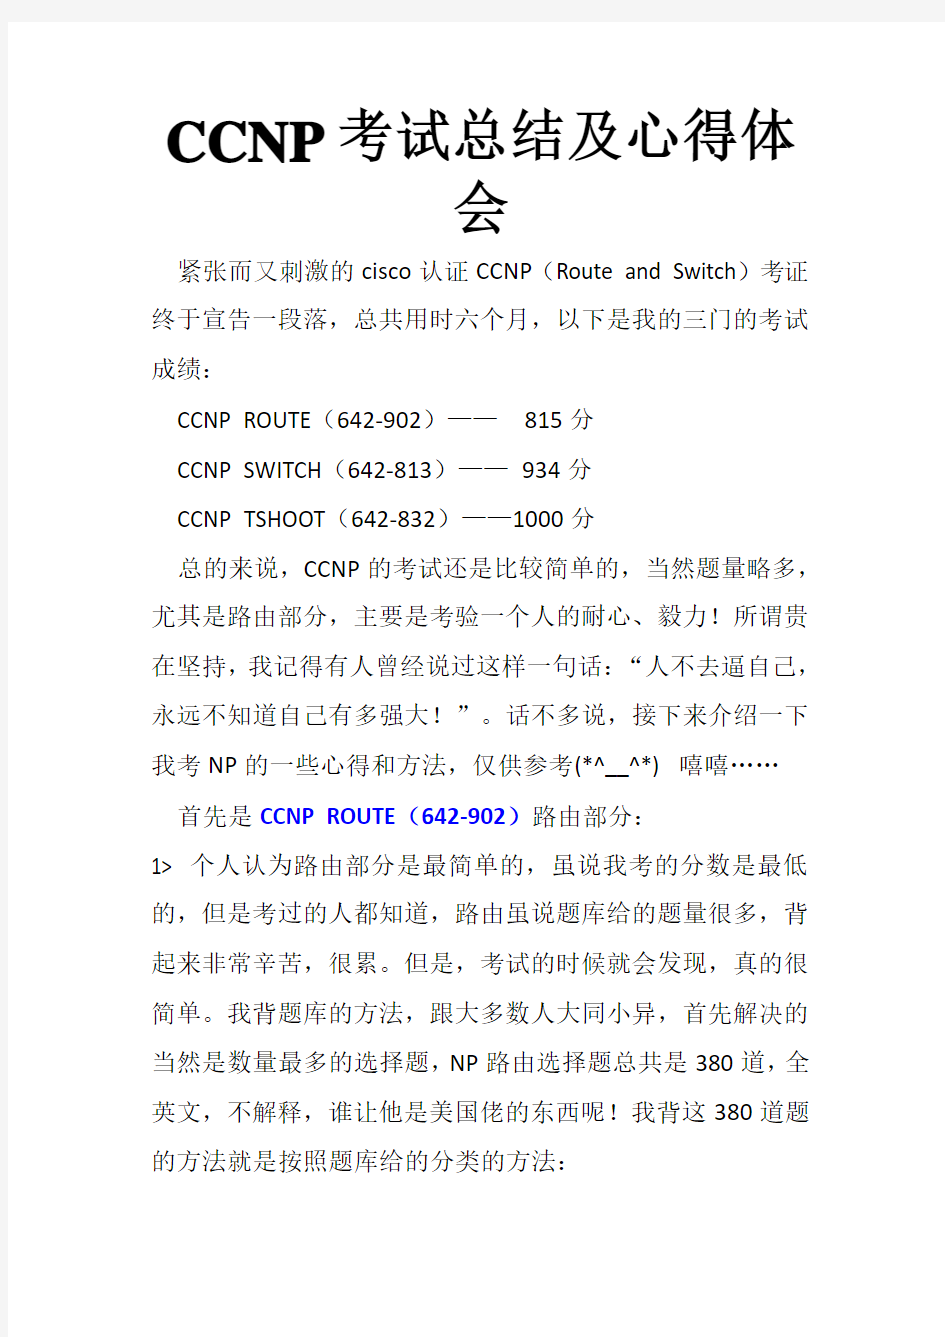 CCNP考试心得